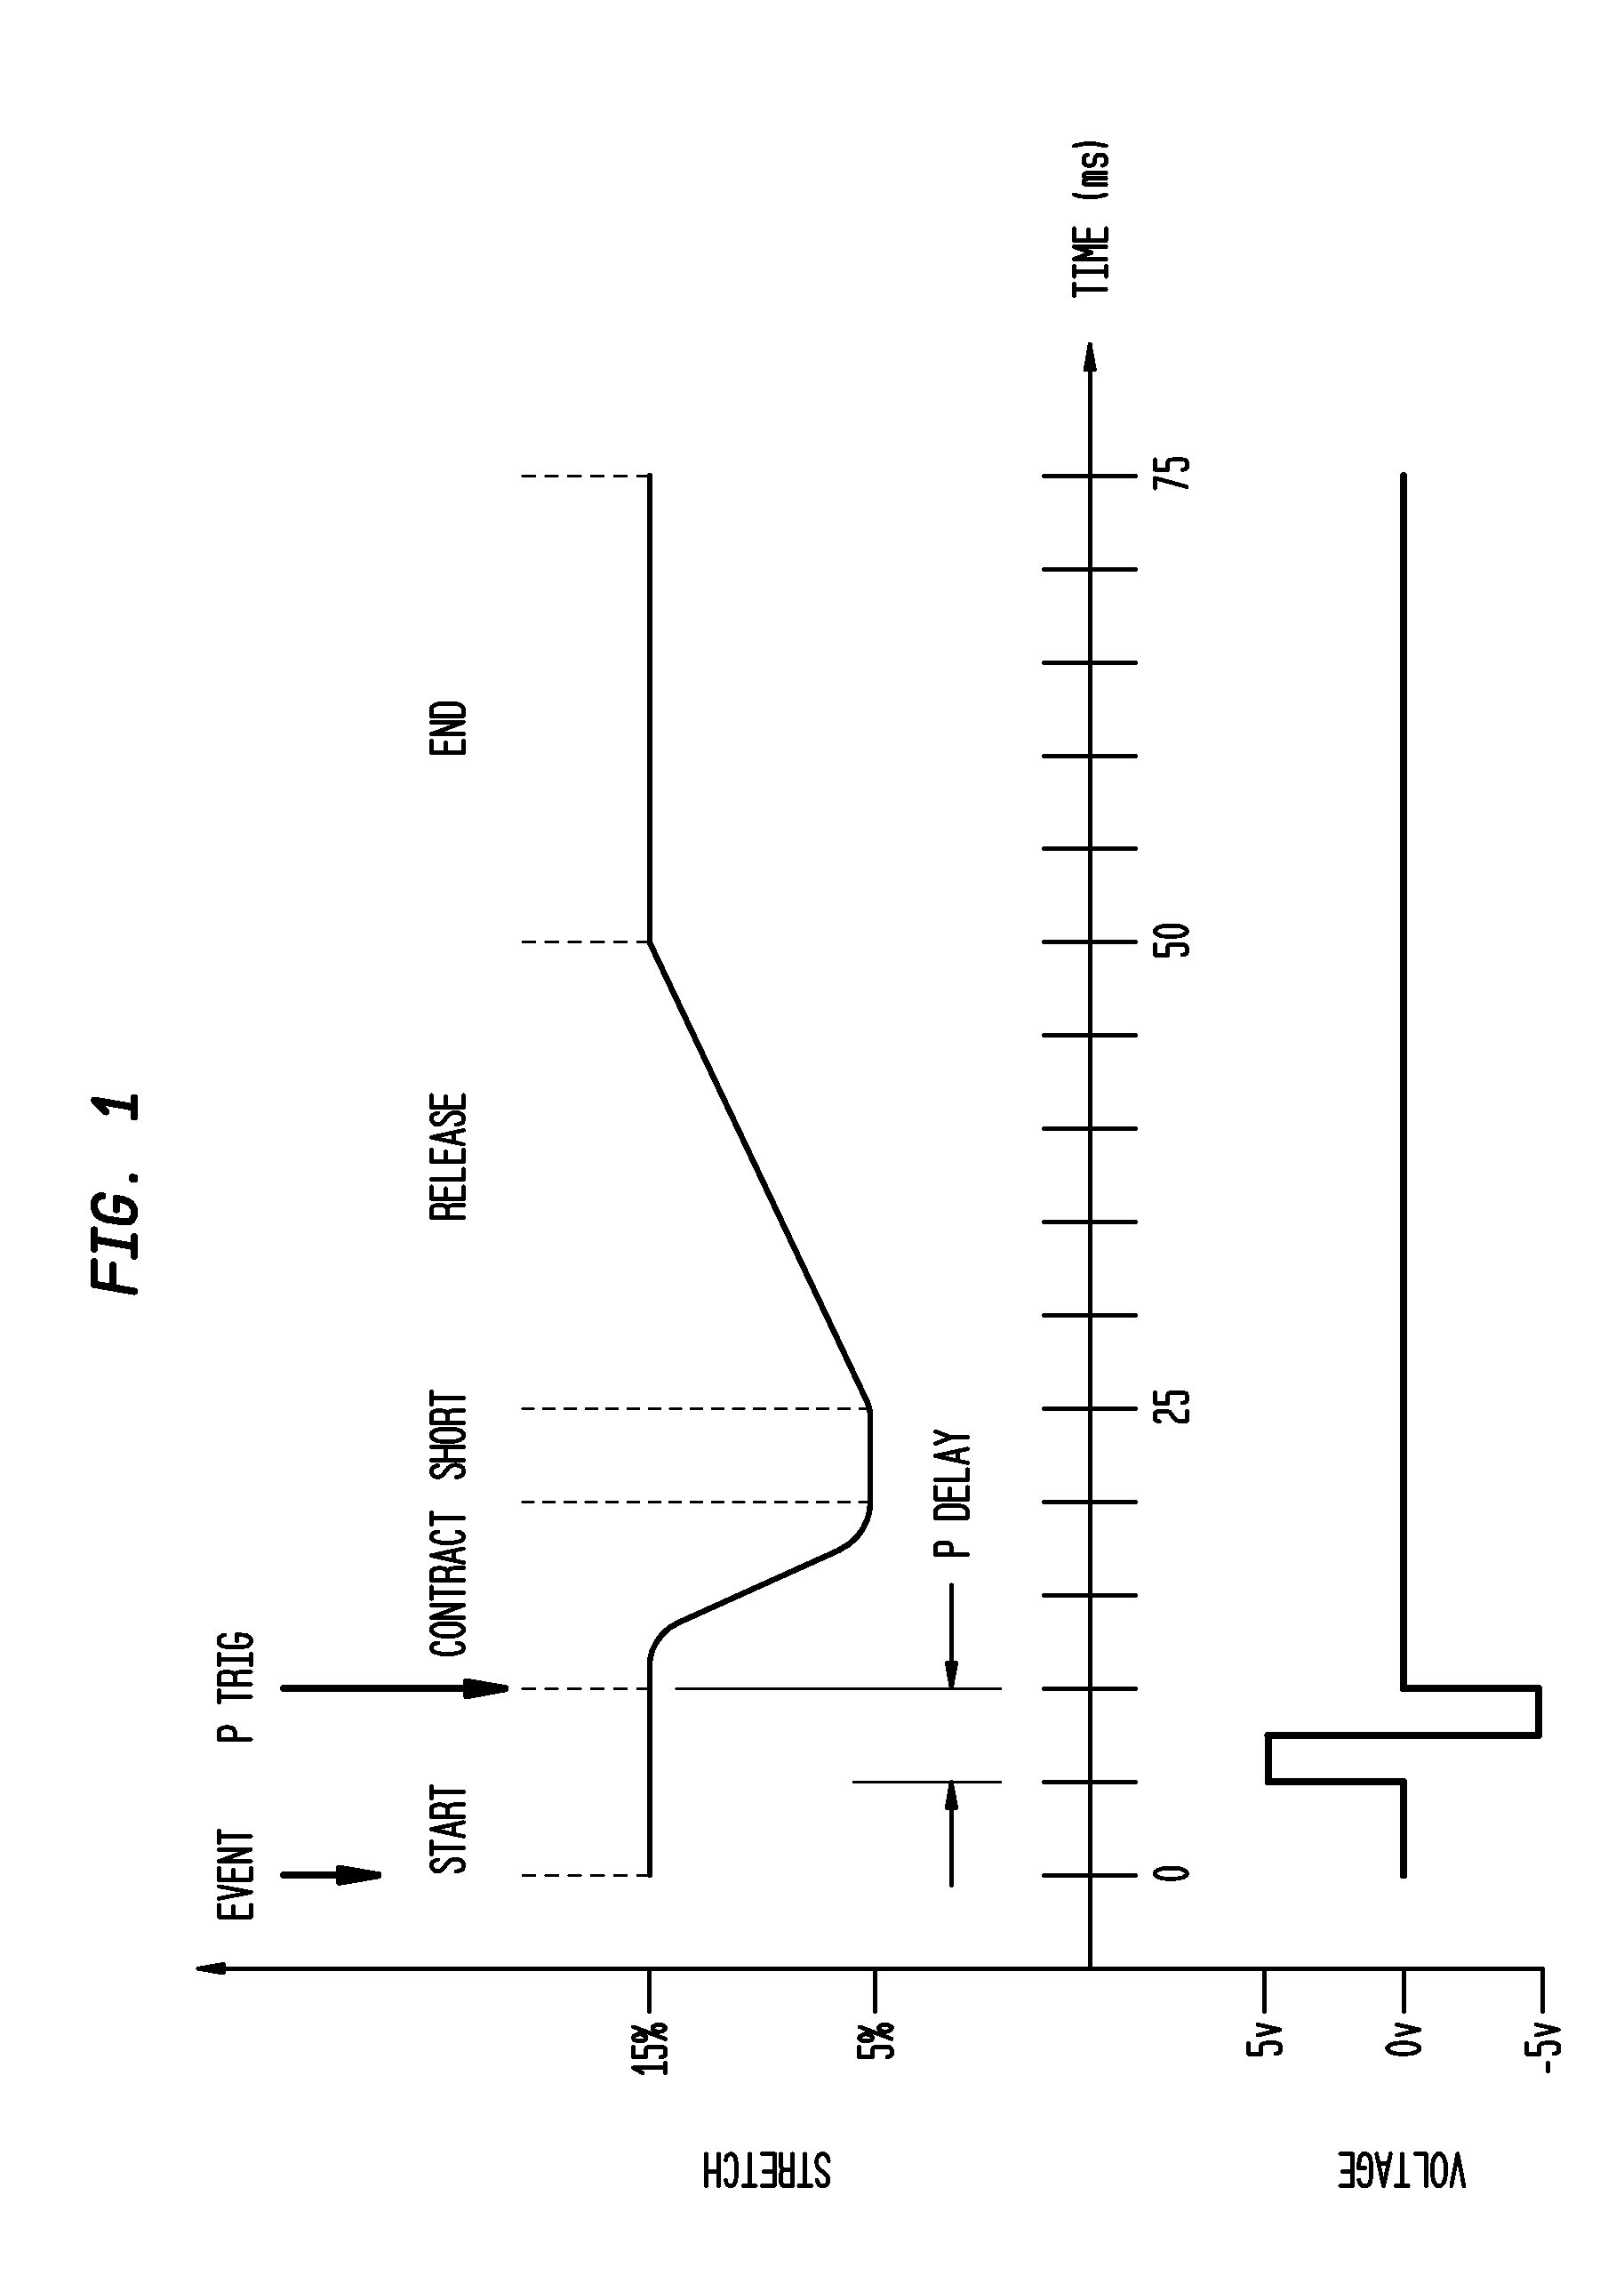 Apparatus and Method for Culturing Cells and Tissue